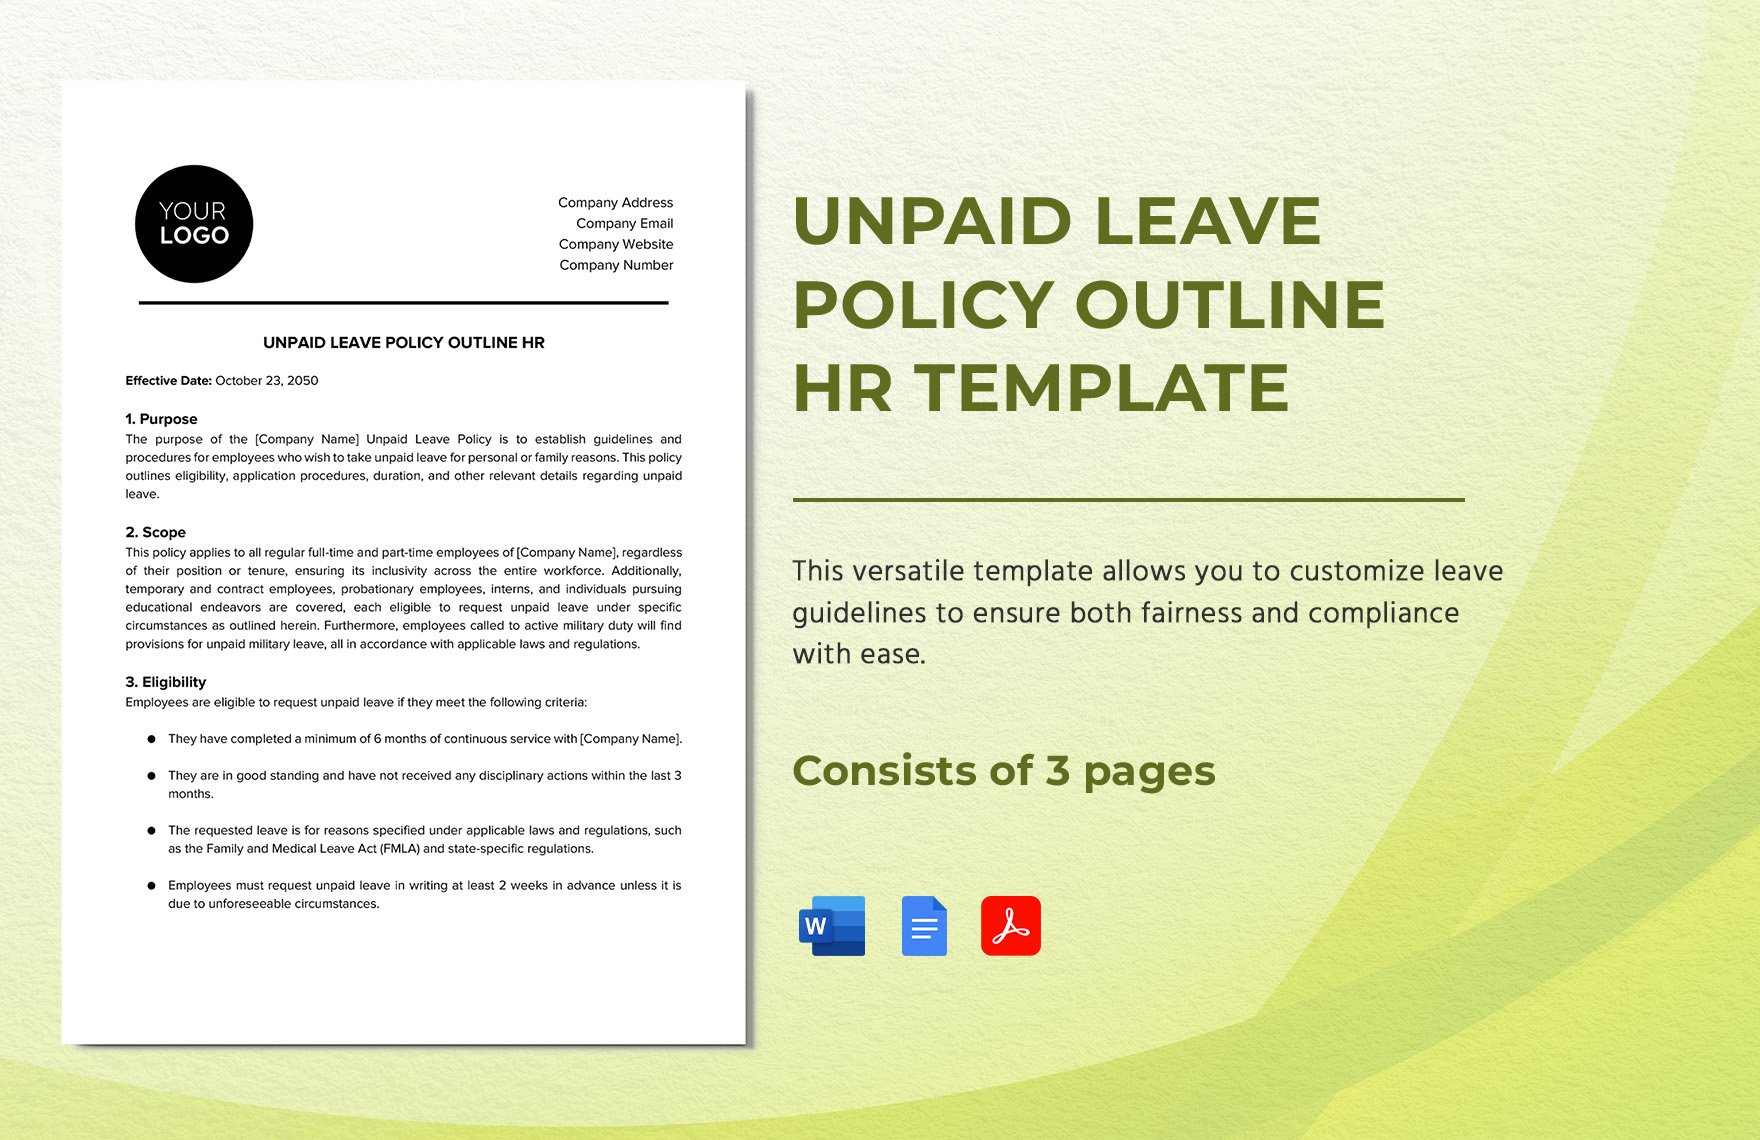 Unpaid Leave Policy Outline HR Template in Word, Google Docs, PDF